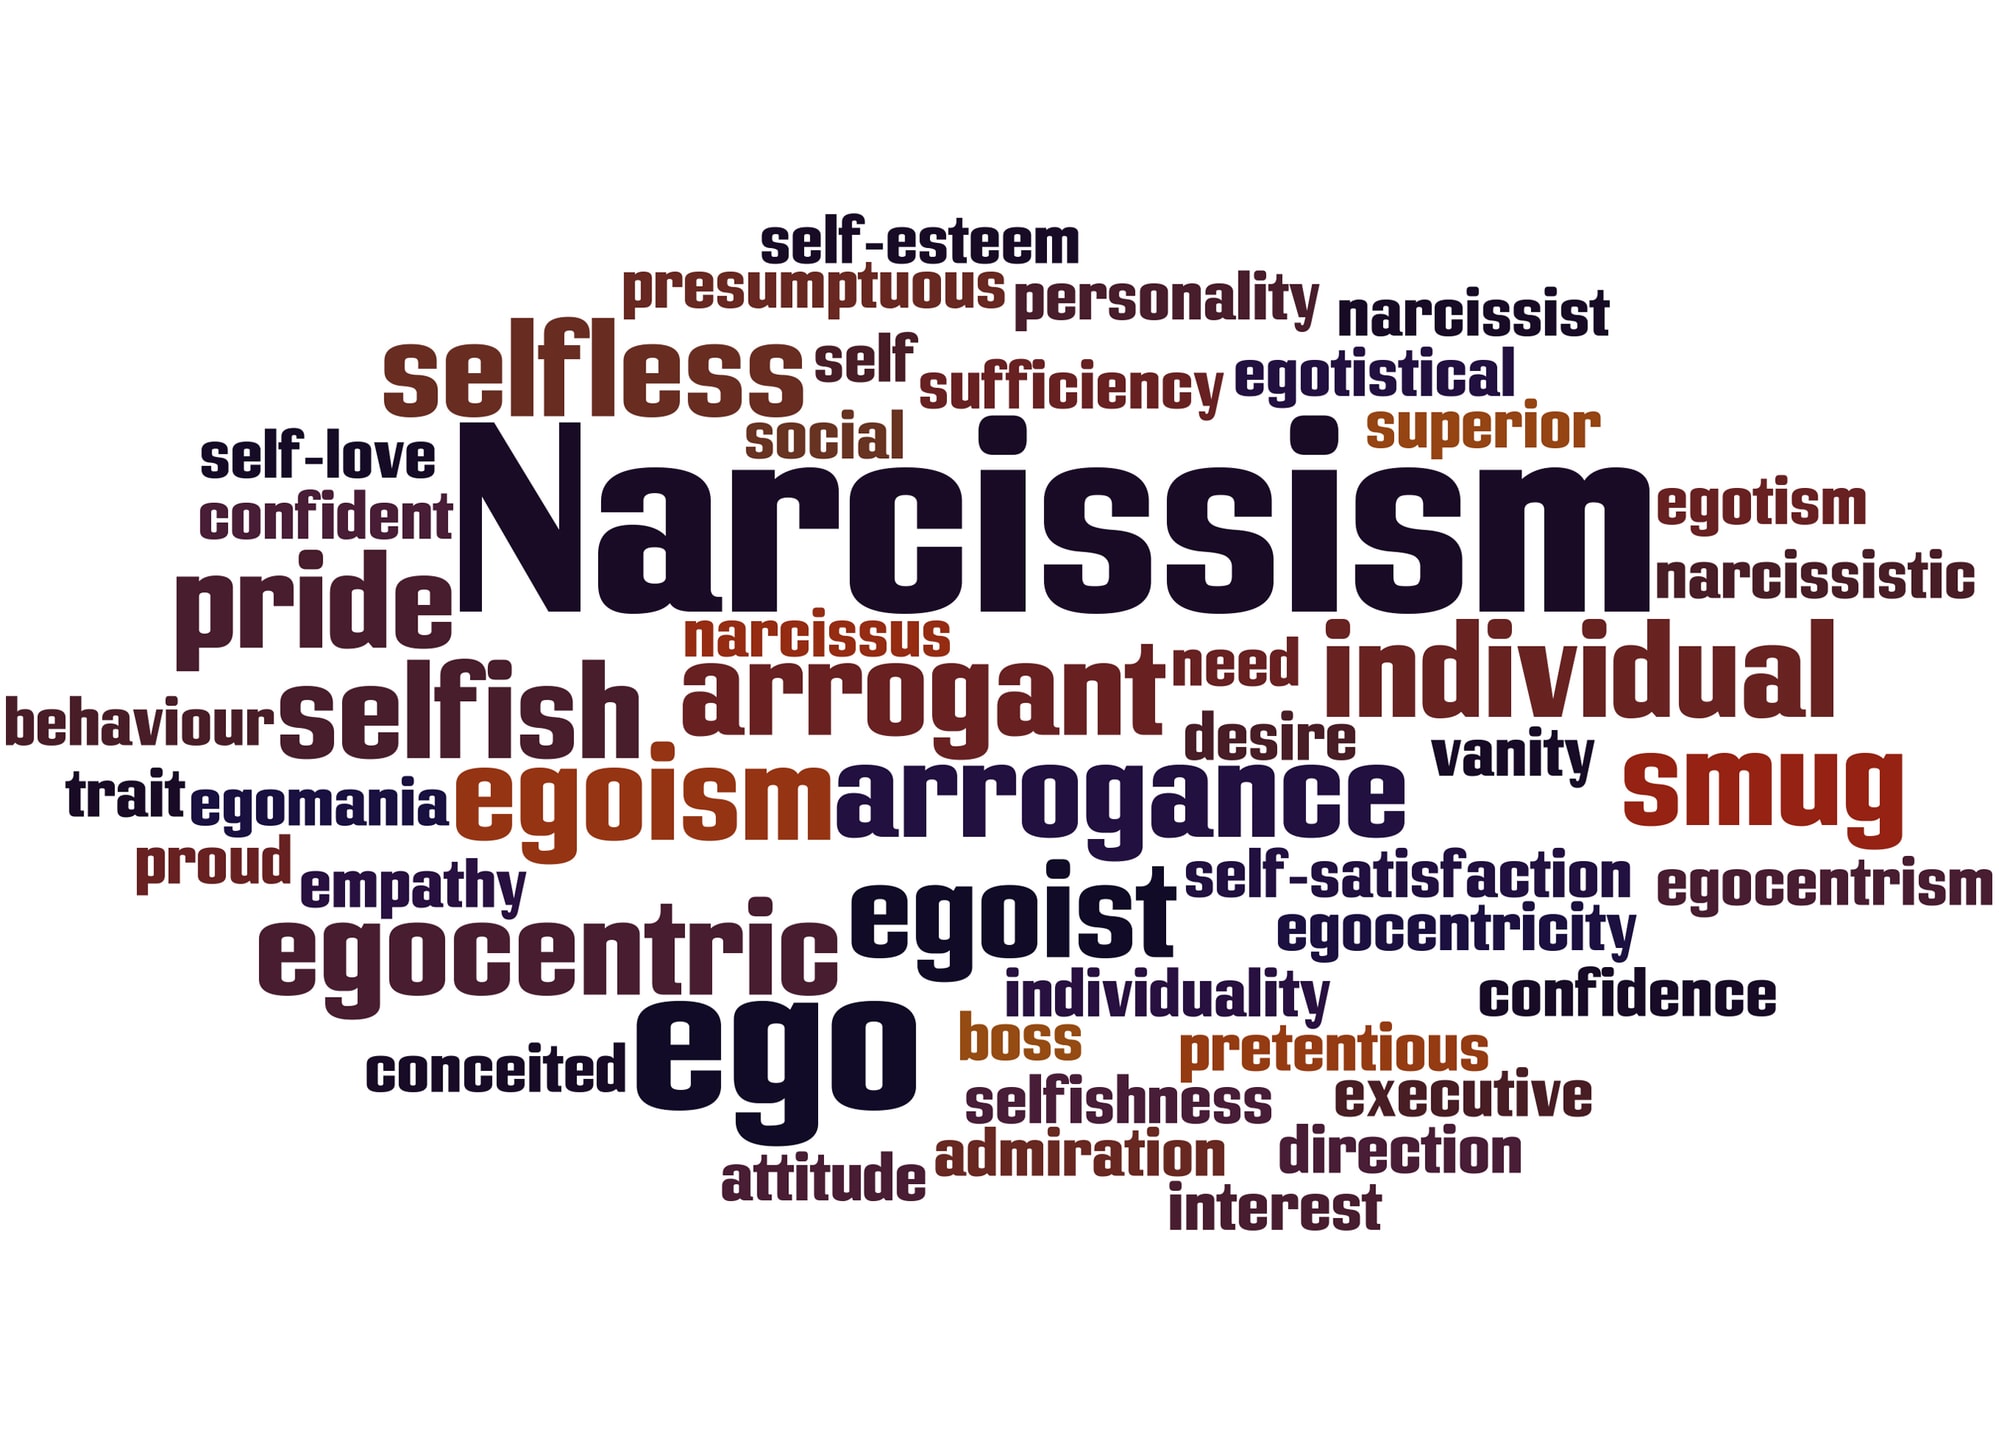 12 traits of narcissism, exploring their implications for interpersonal dynamics and offering insights for those affected.